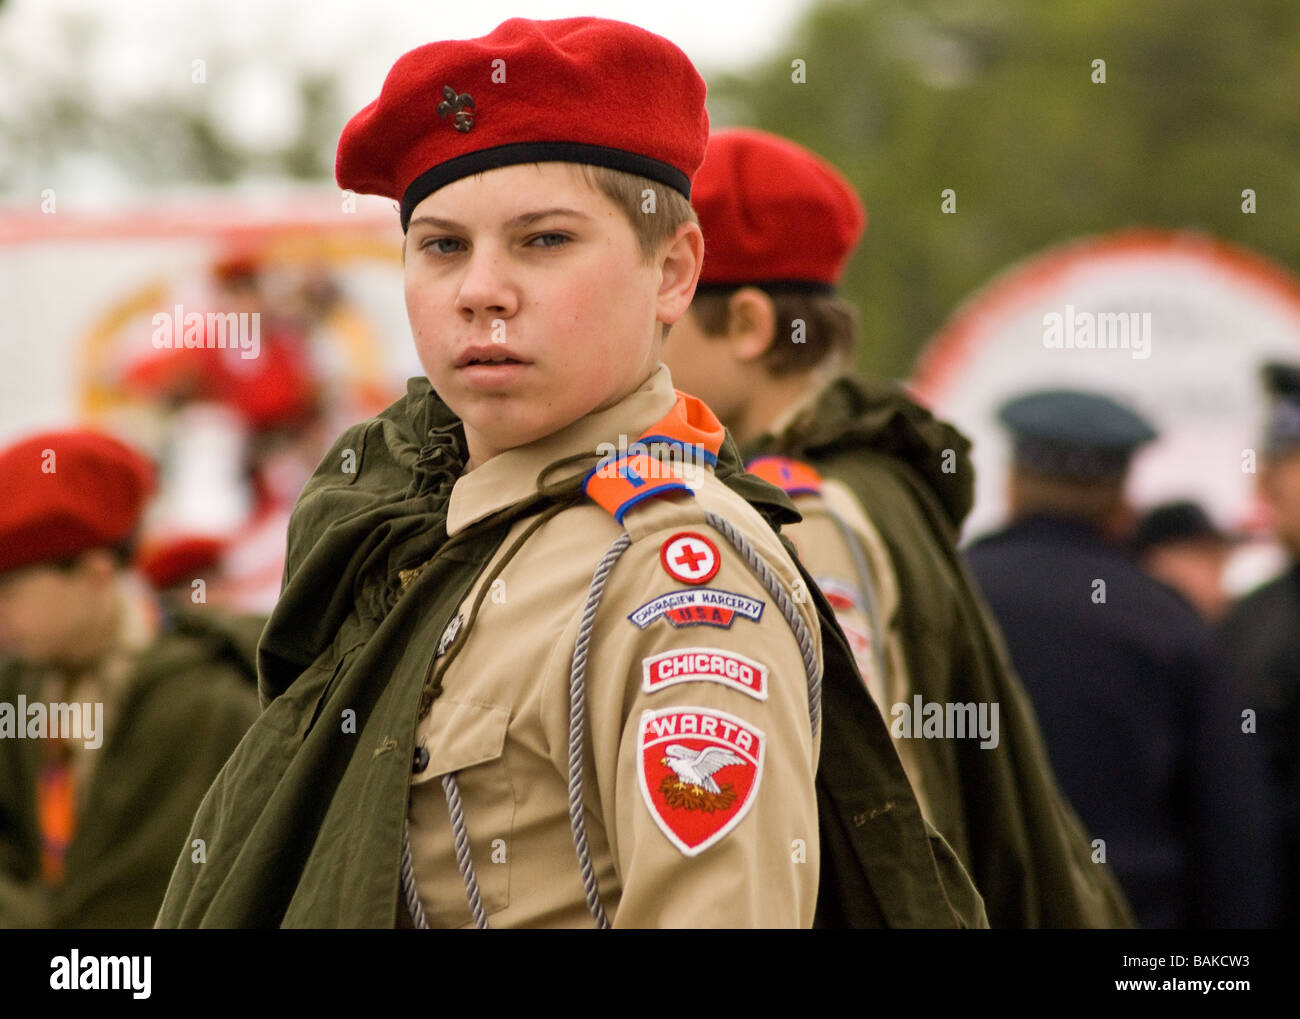 Boy in scout uniform and beret marching in Chicago Polish Parade Stock Photo